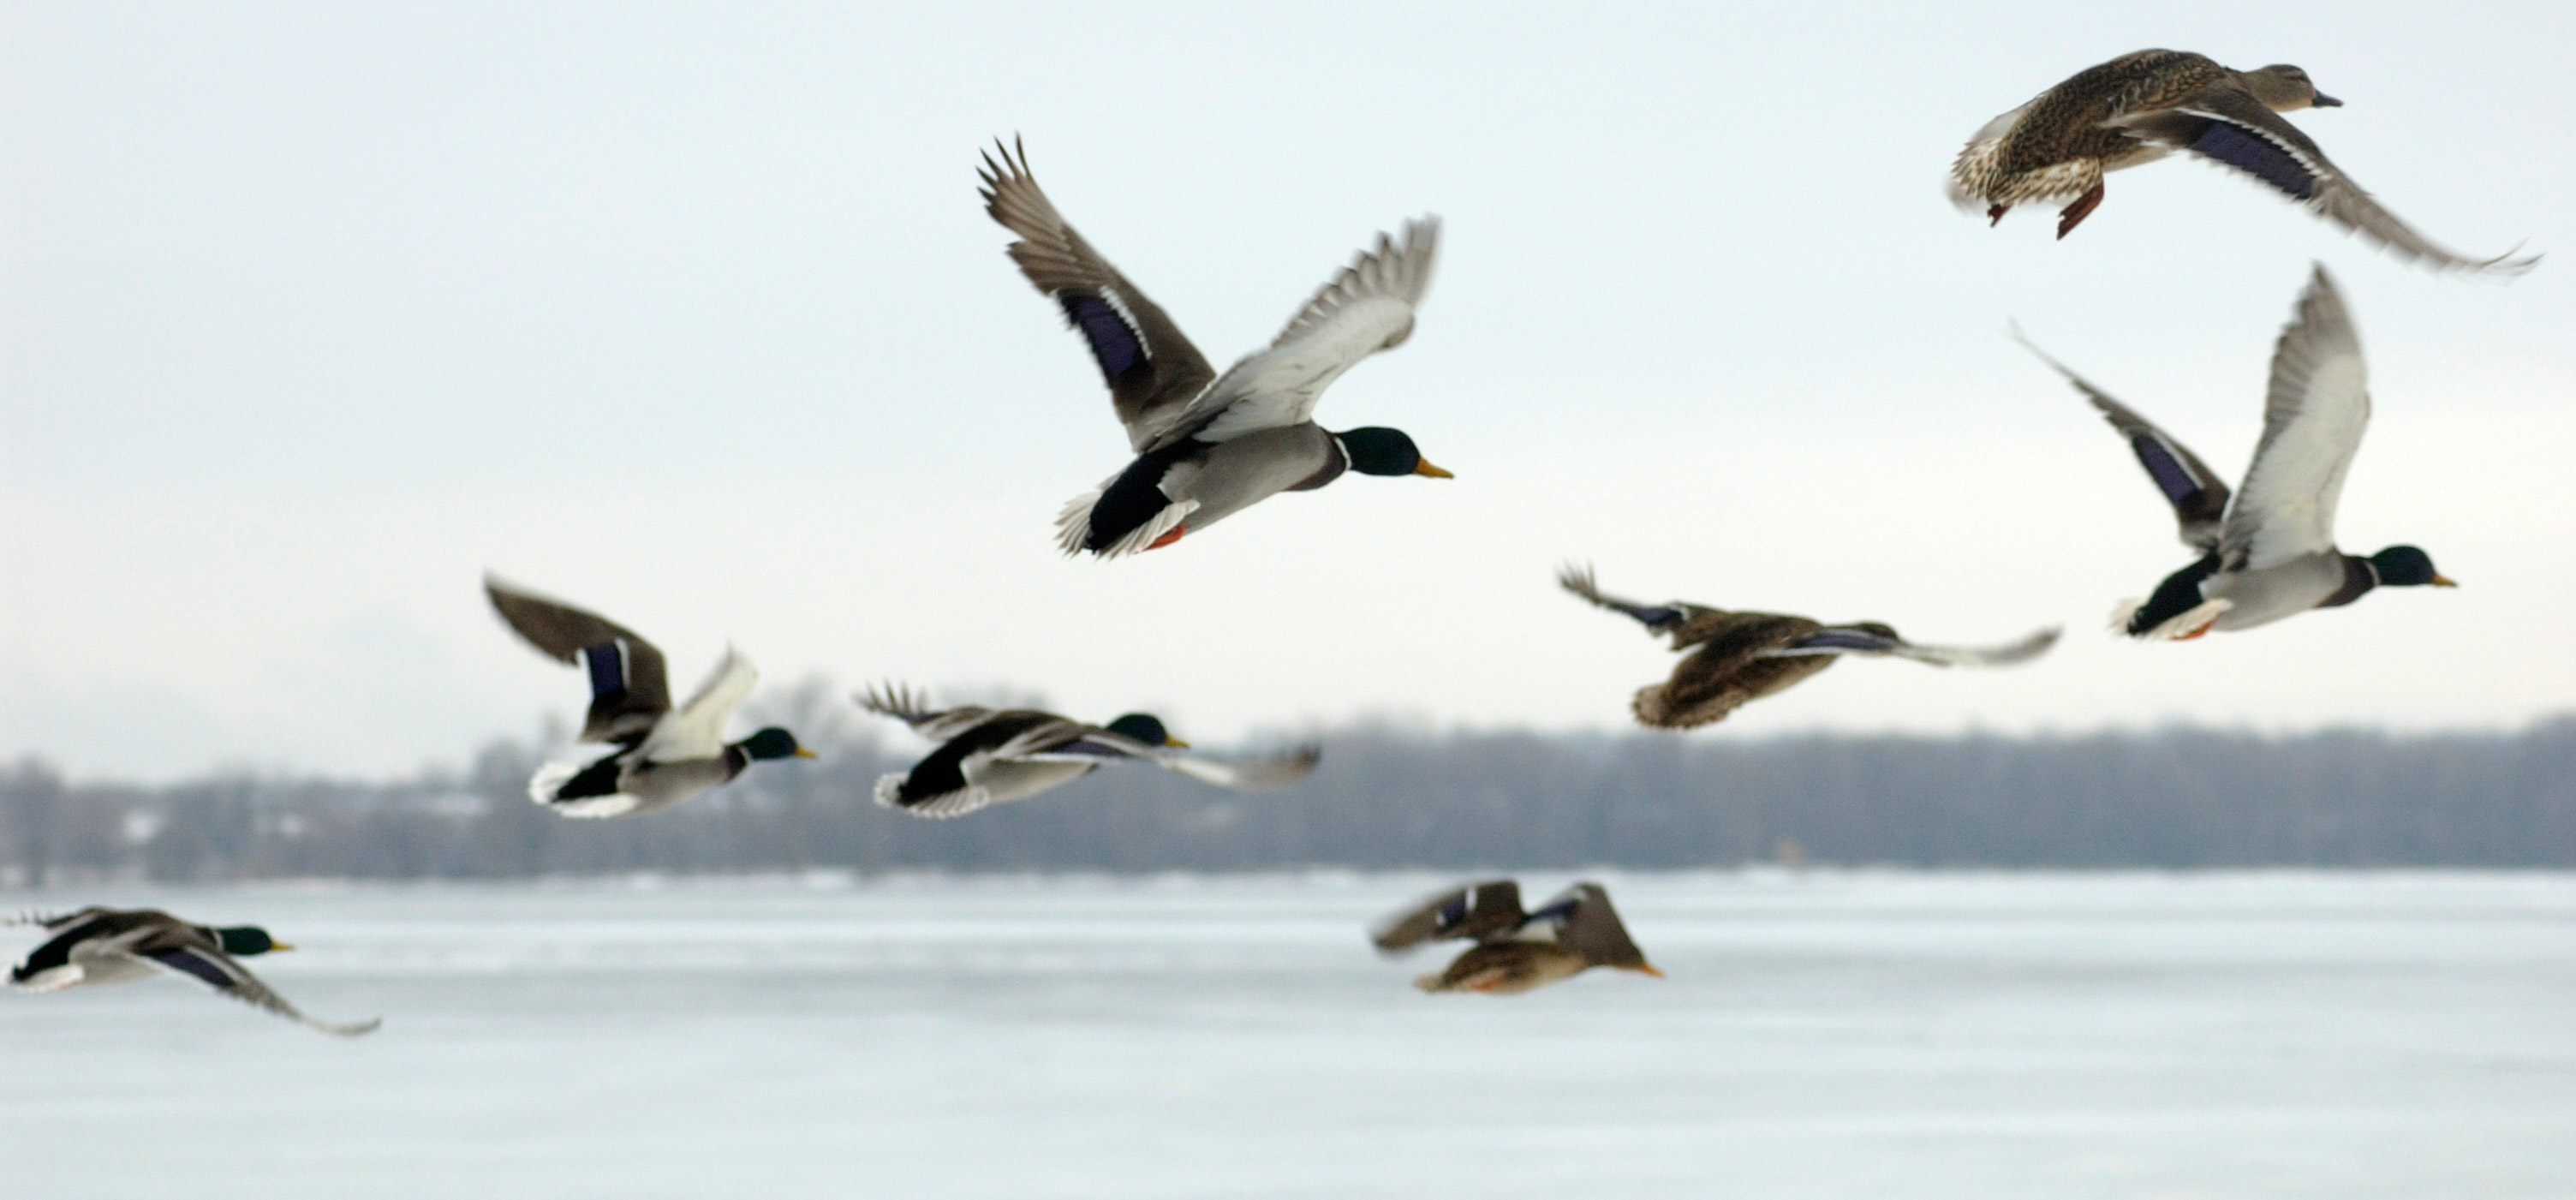 Waterfowl flying over a lake